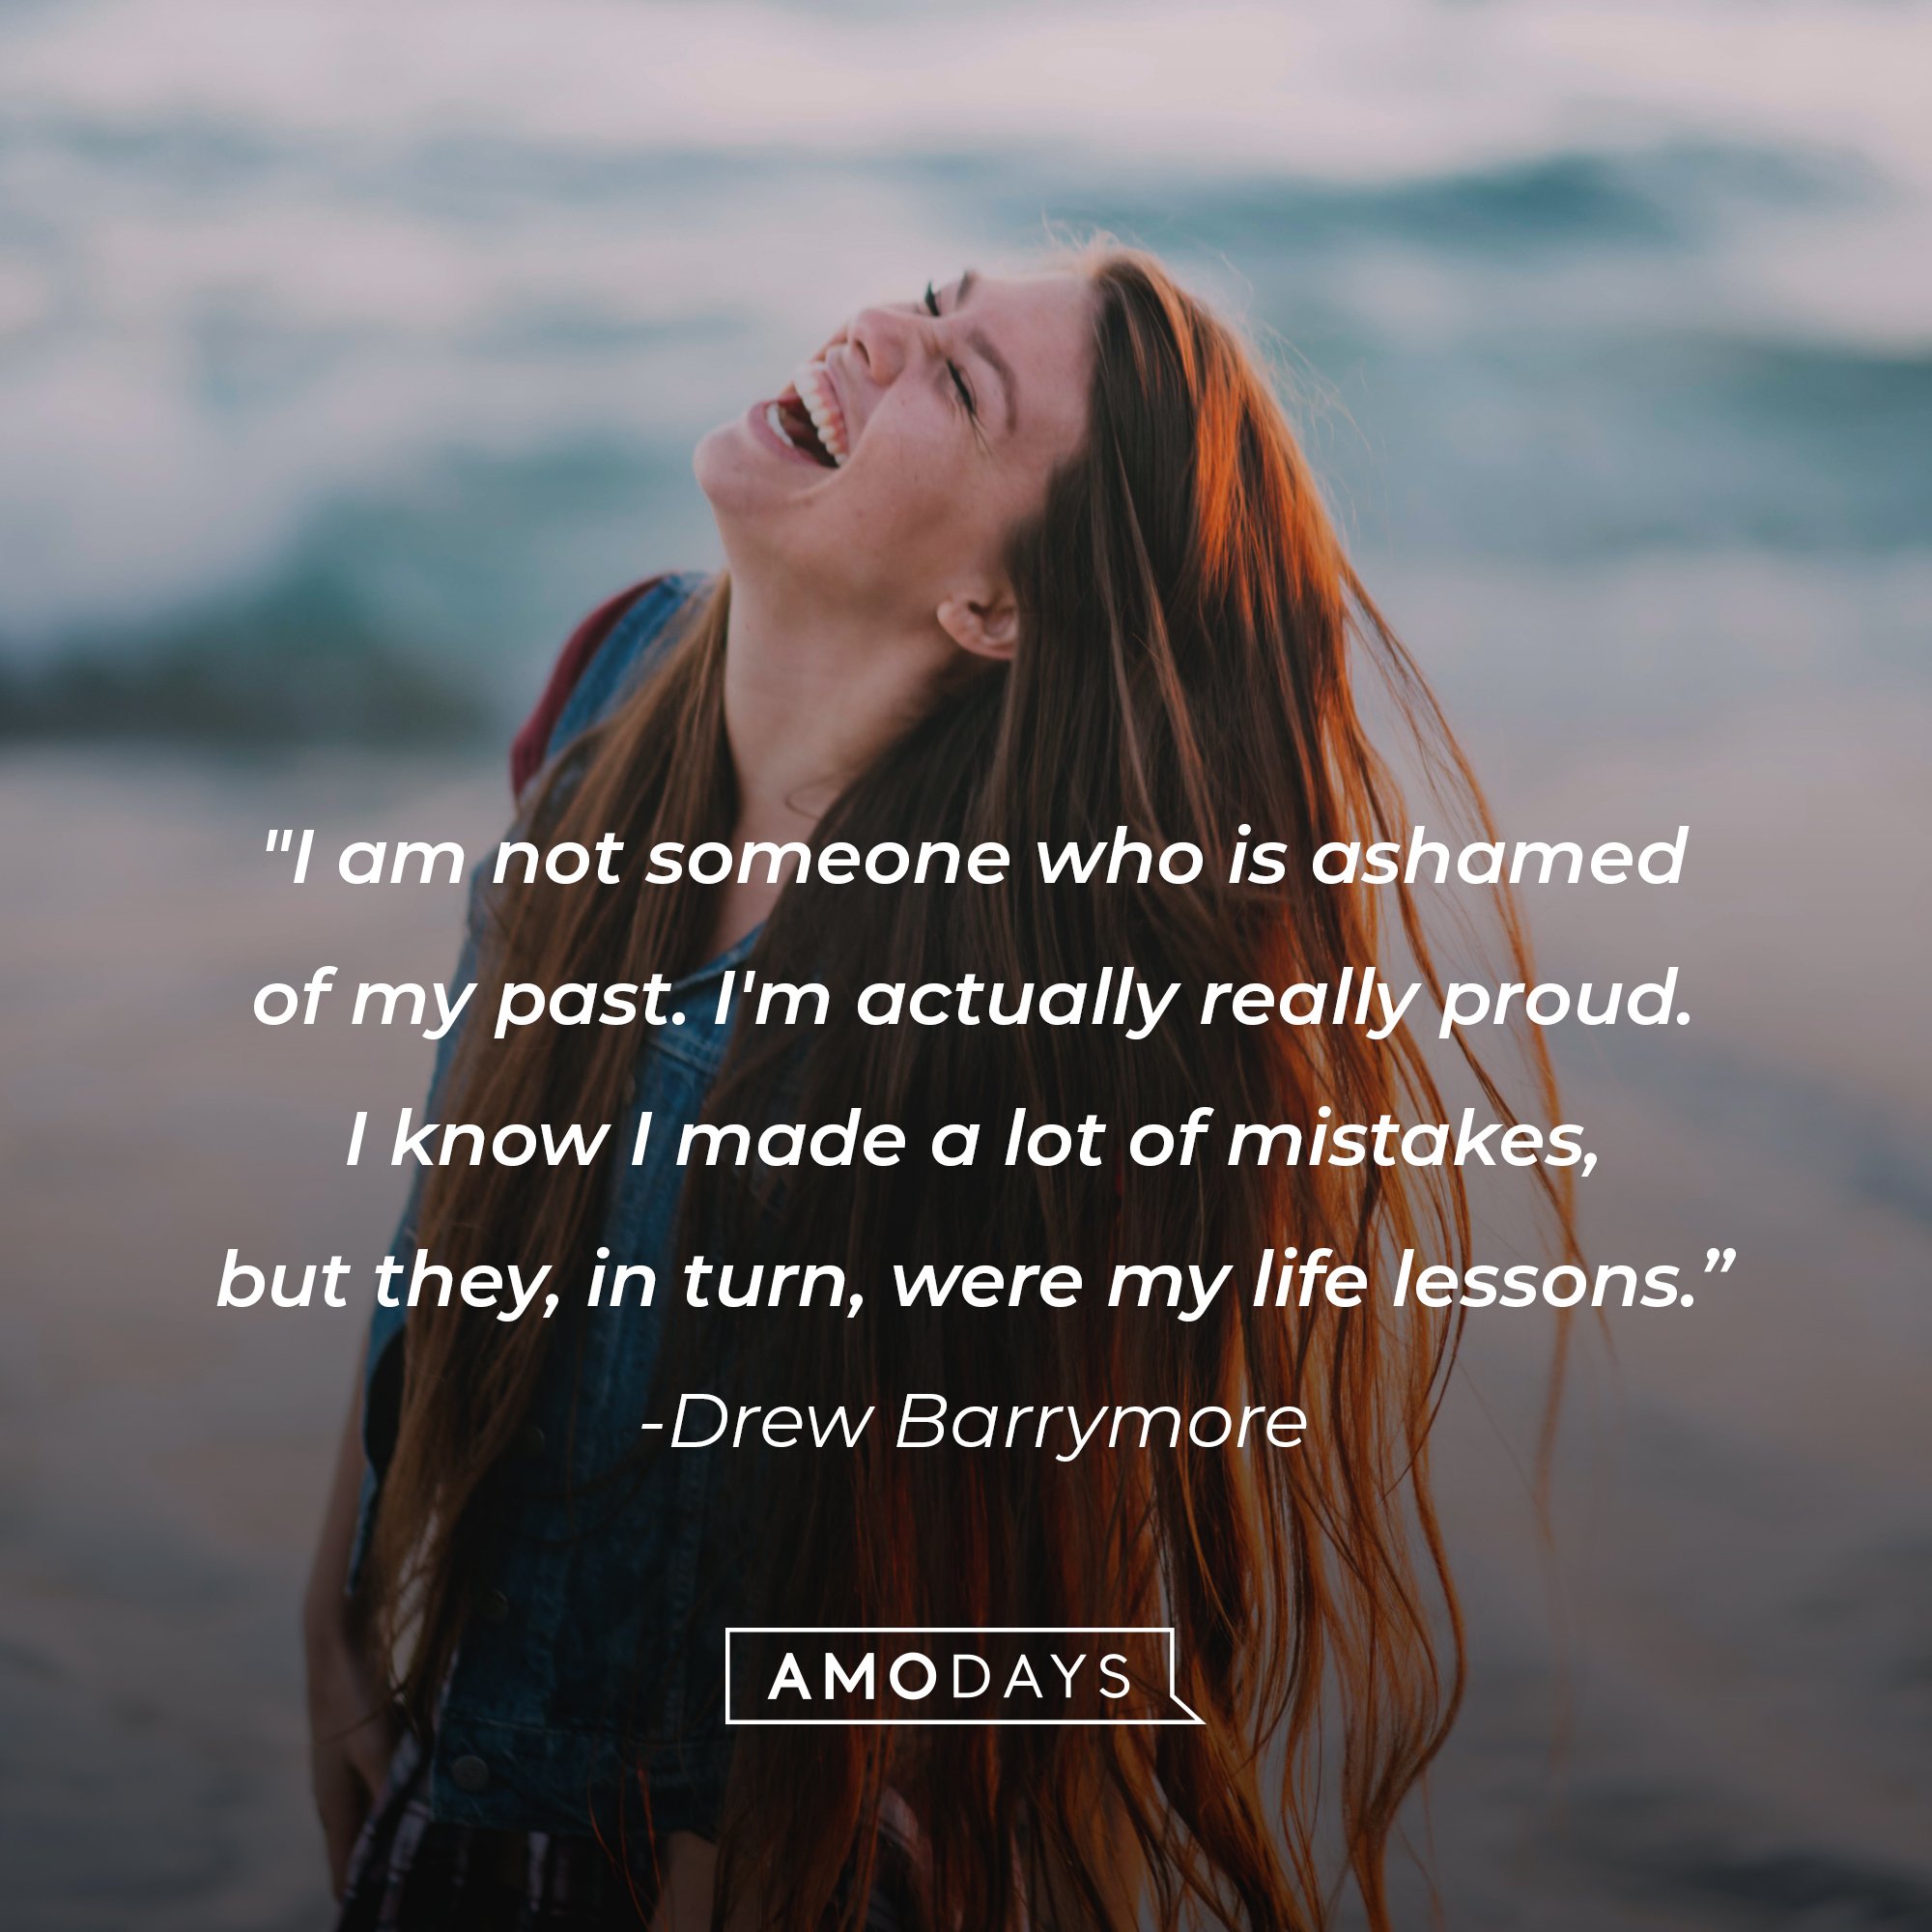 Drew Barrymore’s quote: "I am not someone who is ashamed of my past. I'm actually really proud. I know I made a lot of mistakes, but they, in turn, were my life lessons.” | Image: AmoDays